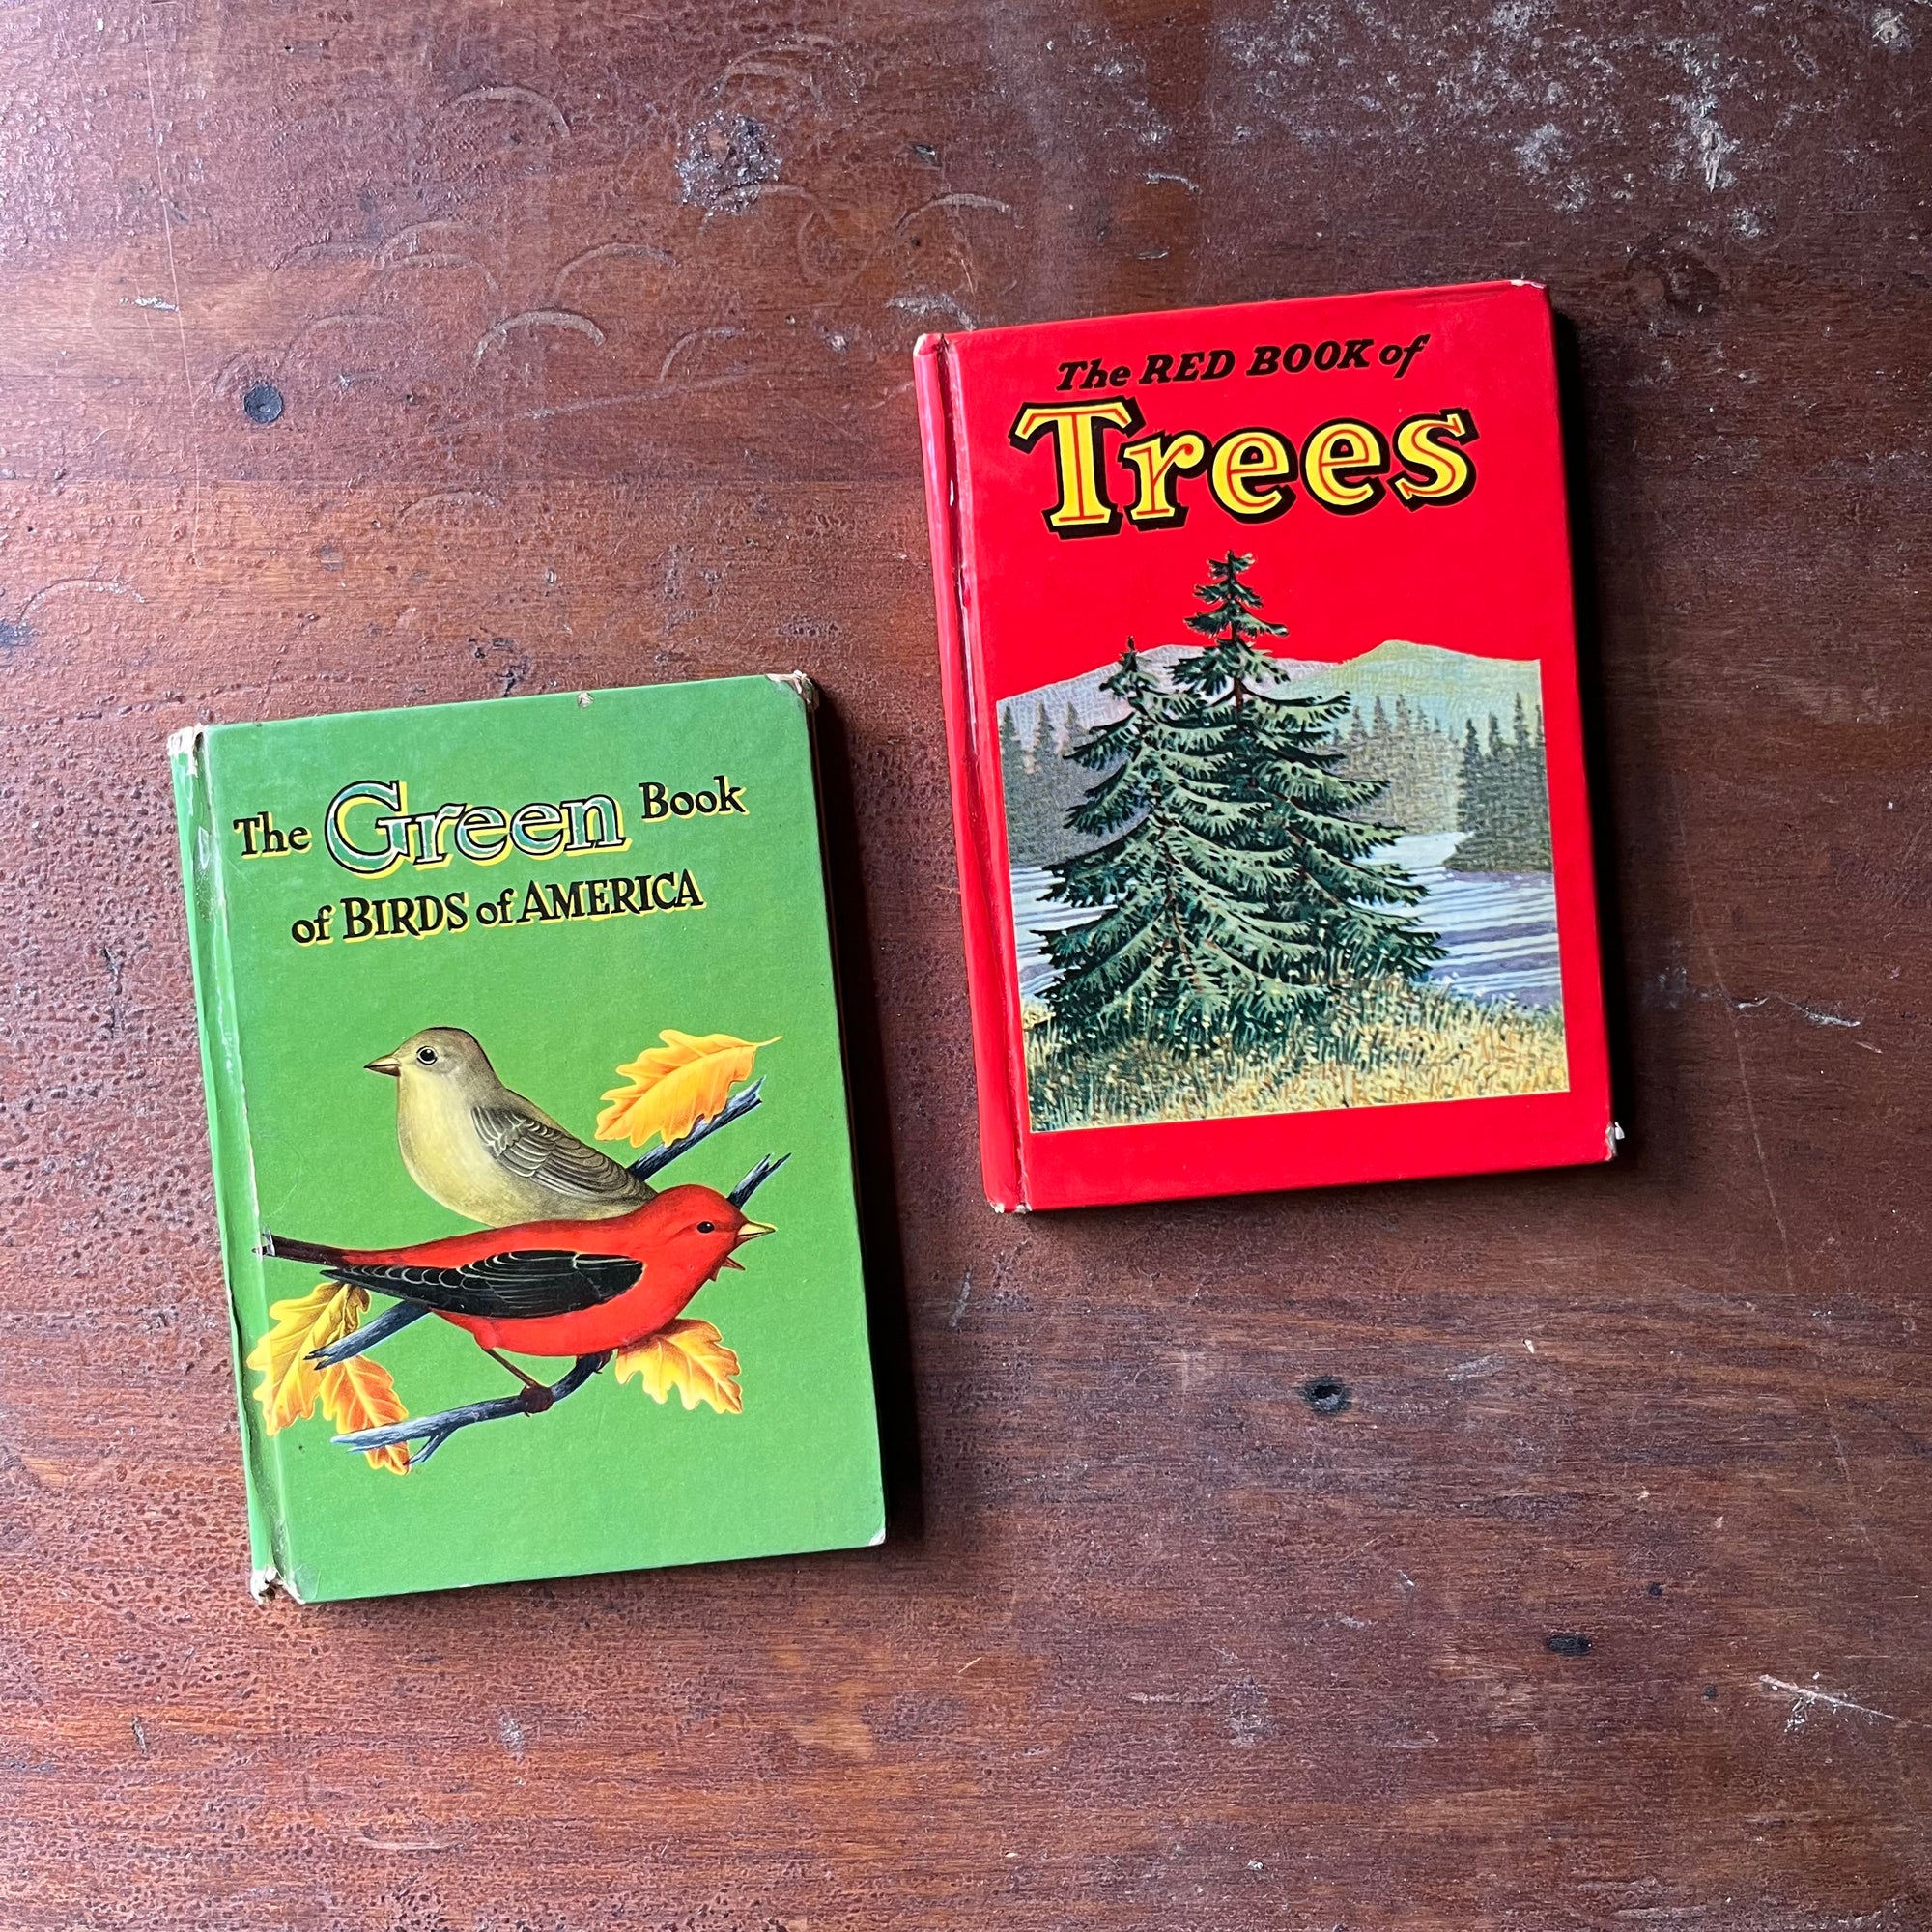 vintage pocket nature guides published by The Whitman Publishing Company - Pair of Whitman Nature Guides:  The Green Book of Birds of America and The Red Book of Trees - view of the front covers